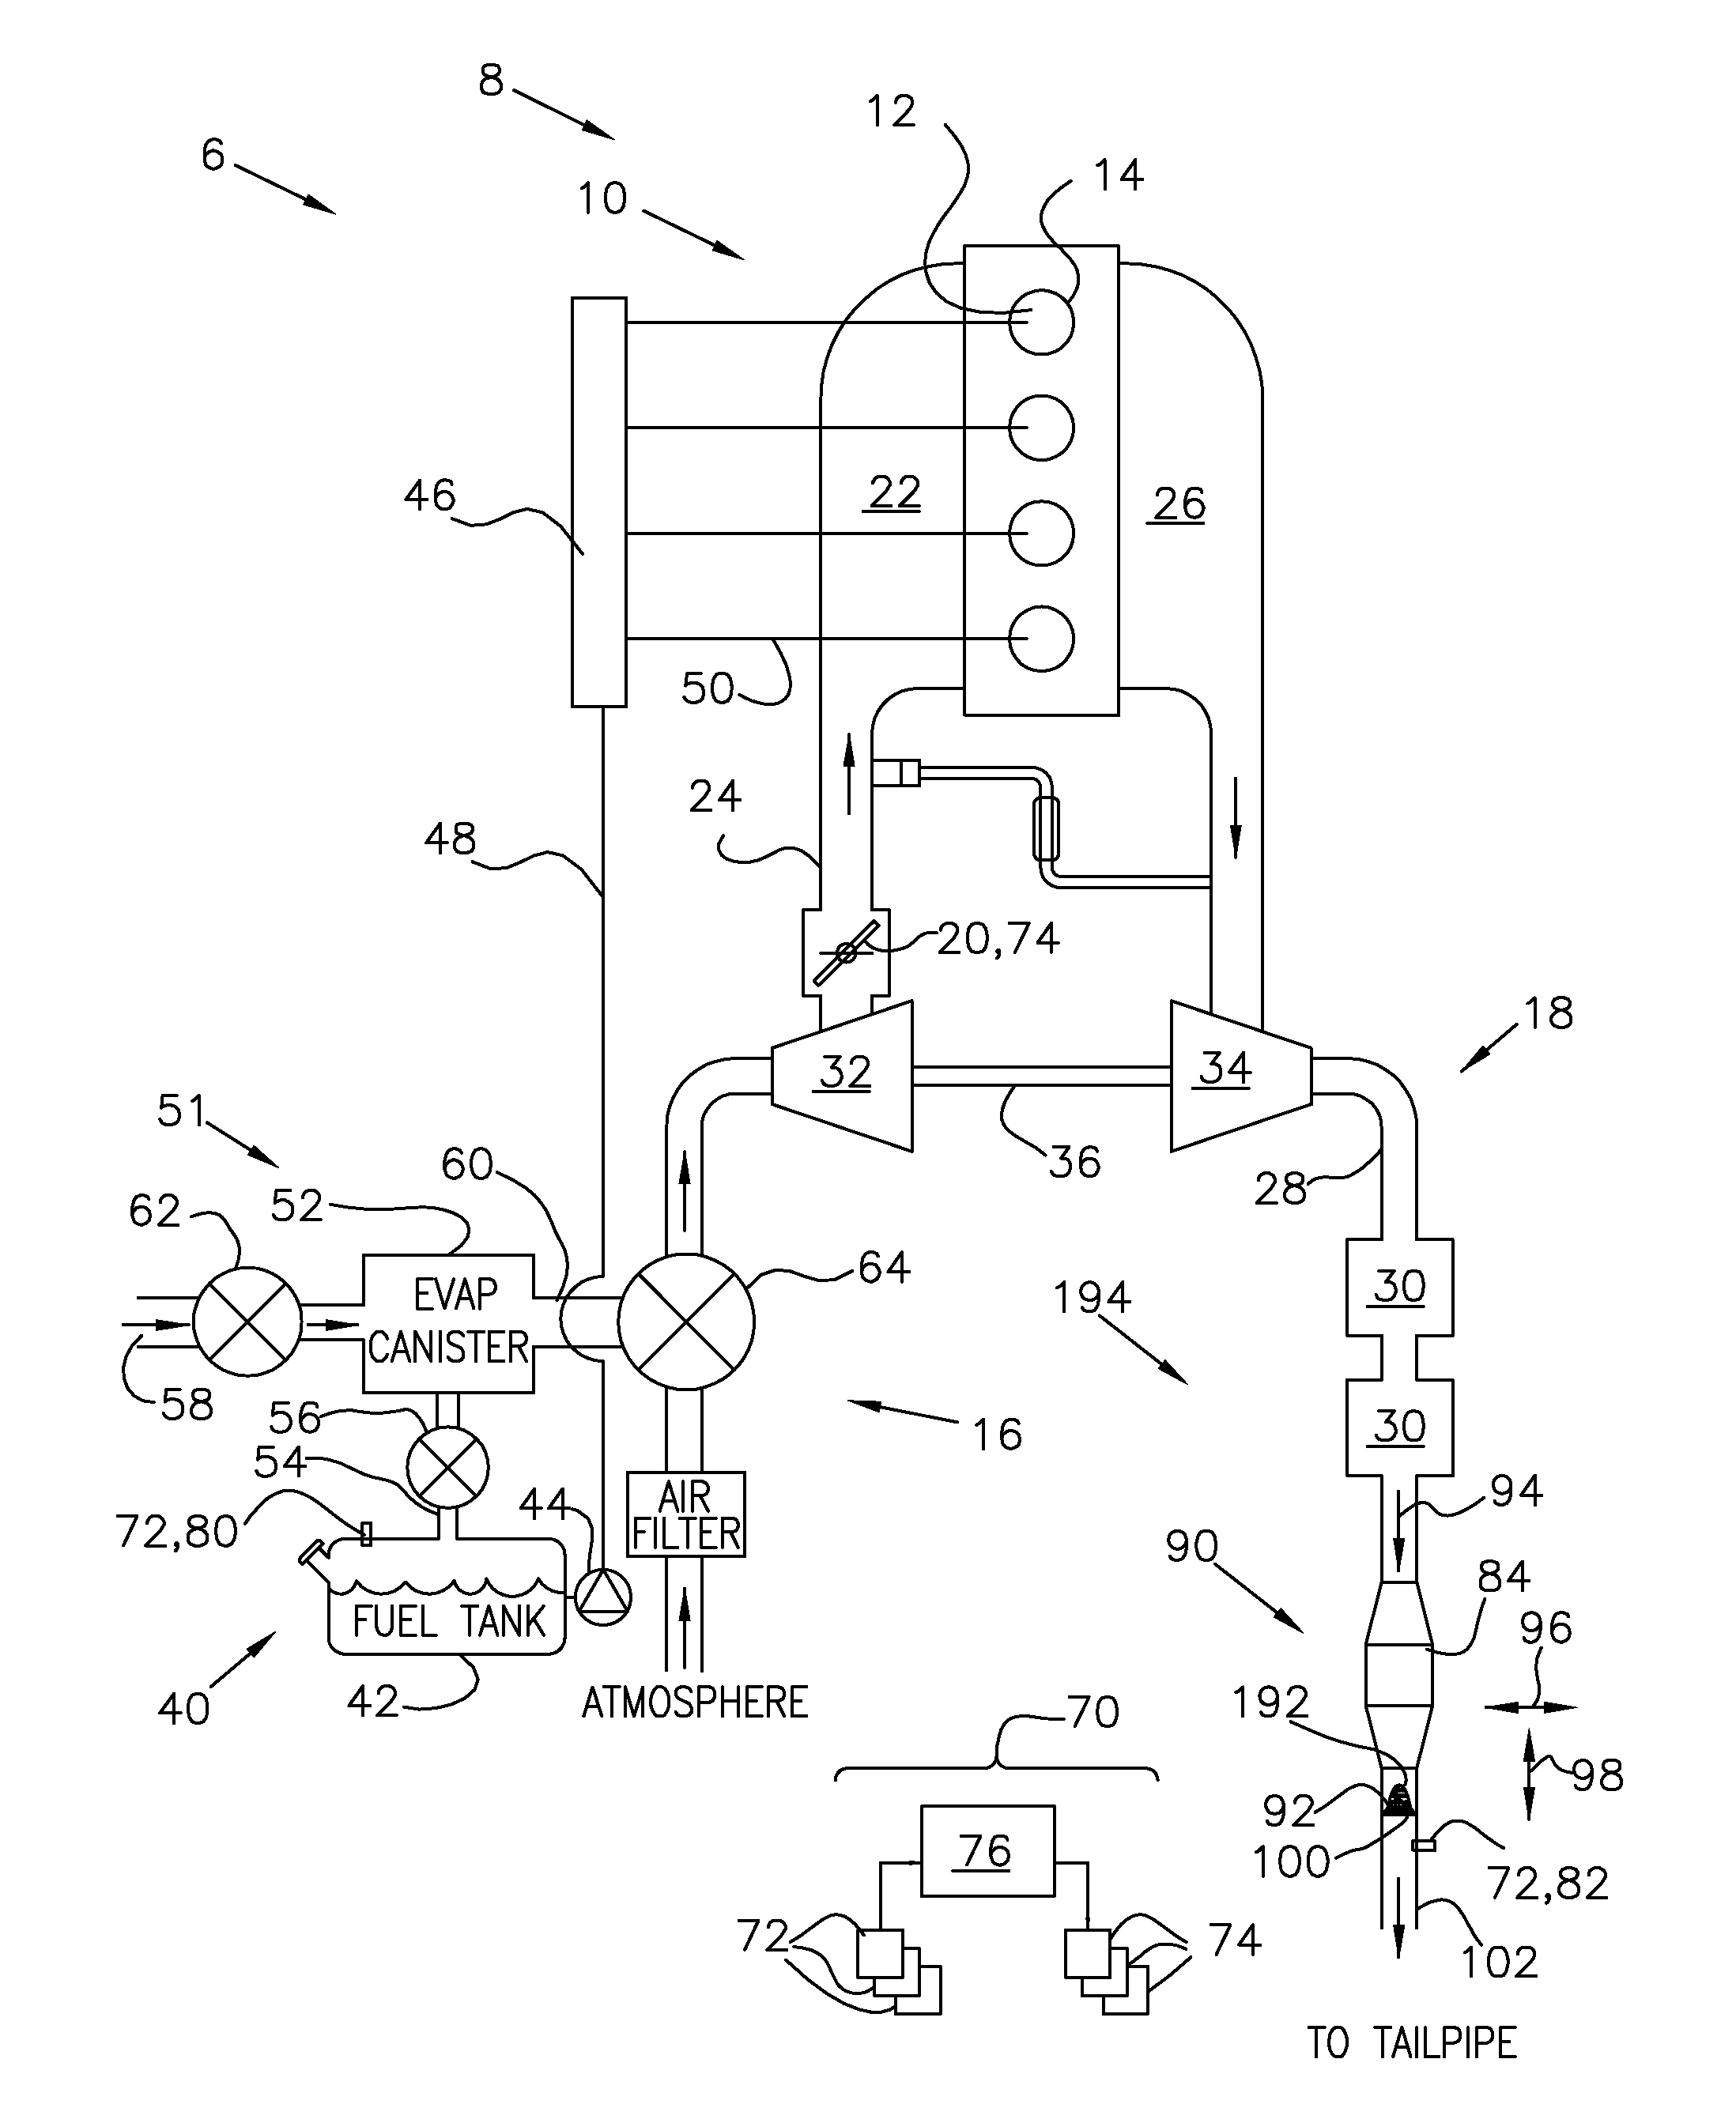 Exhaust gas mixer and system